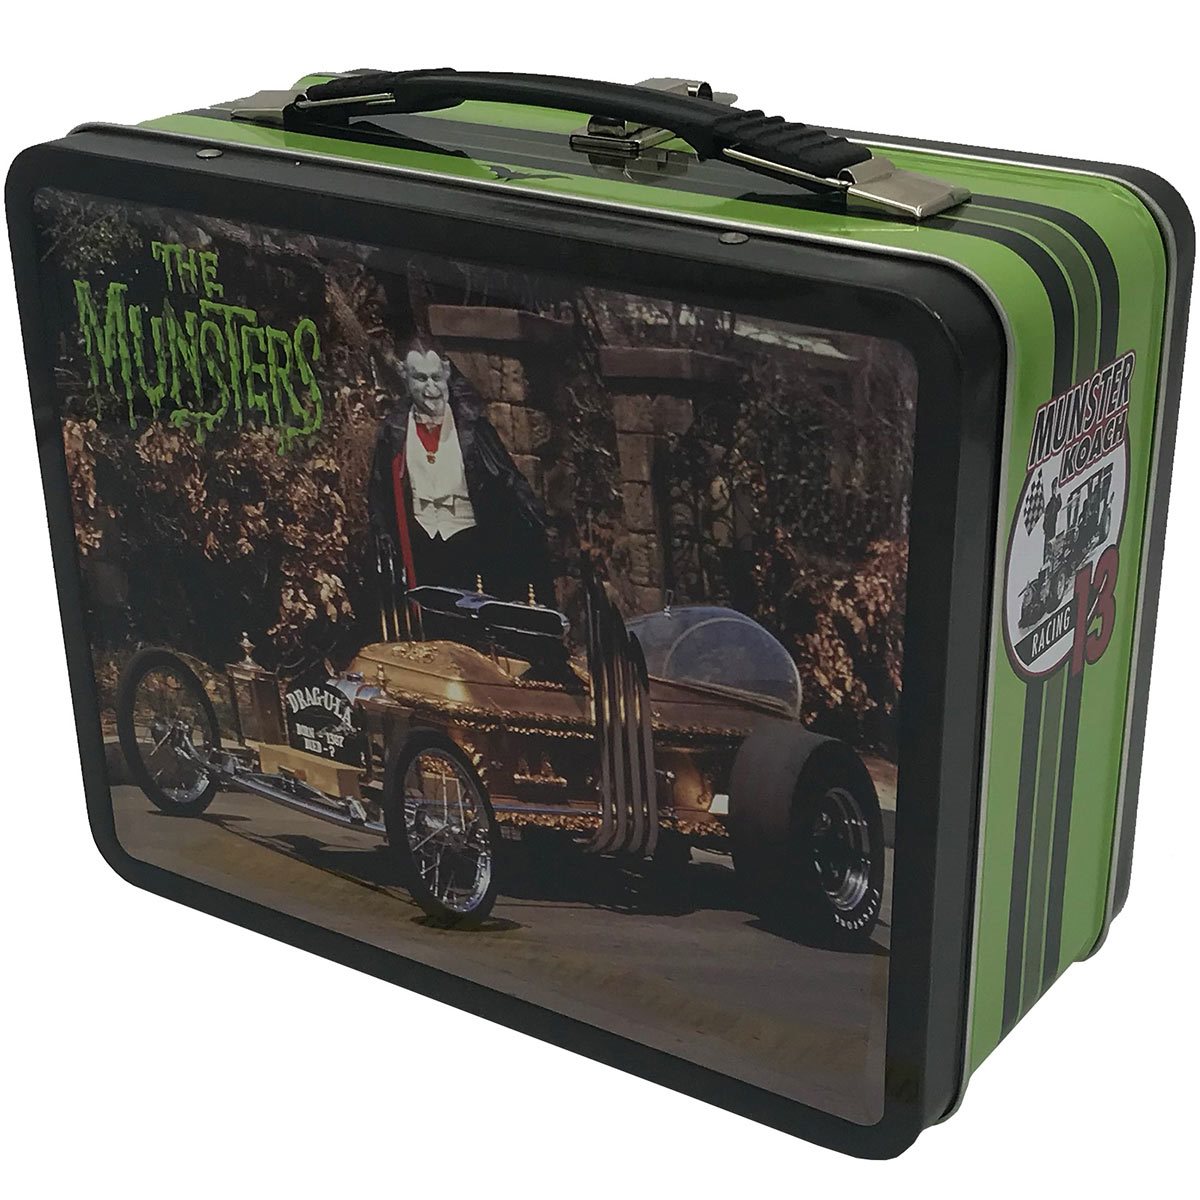 Munsters Lunch Box